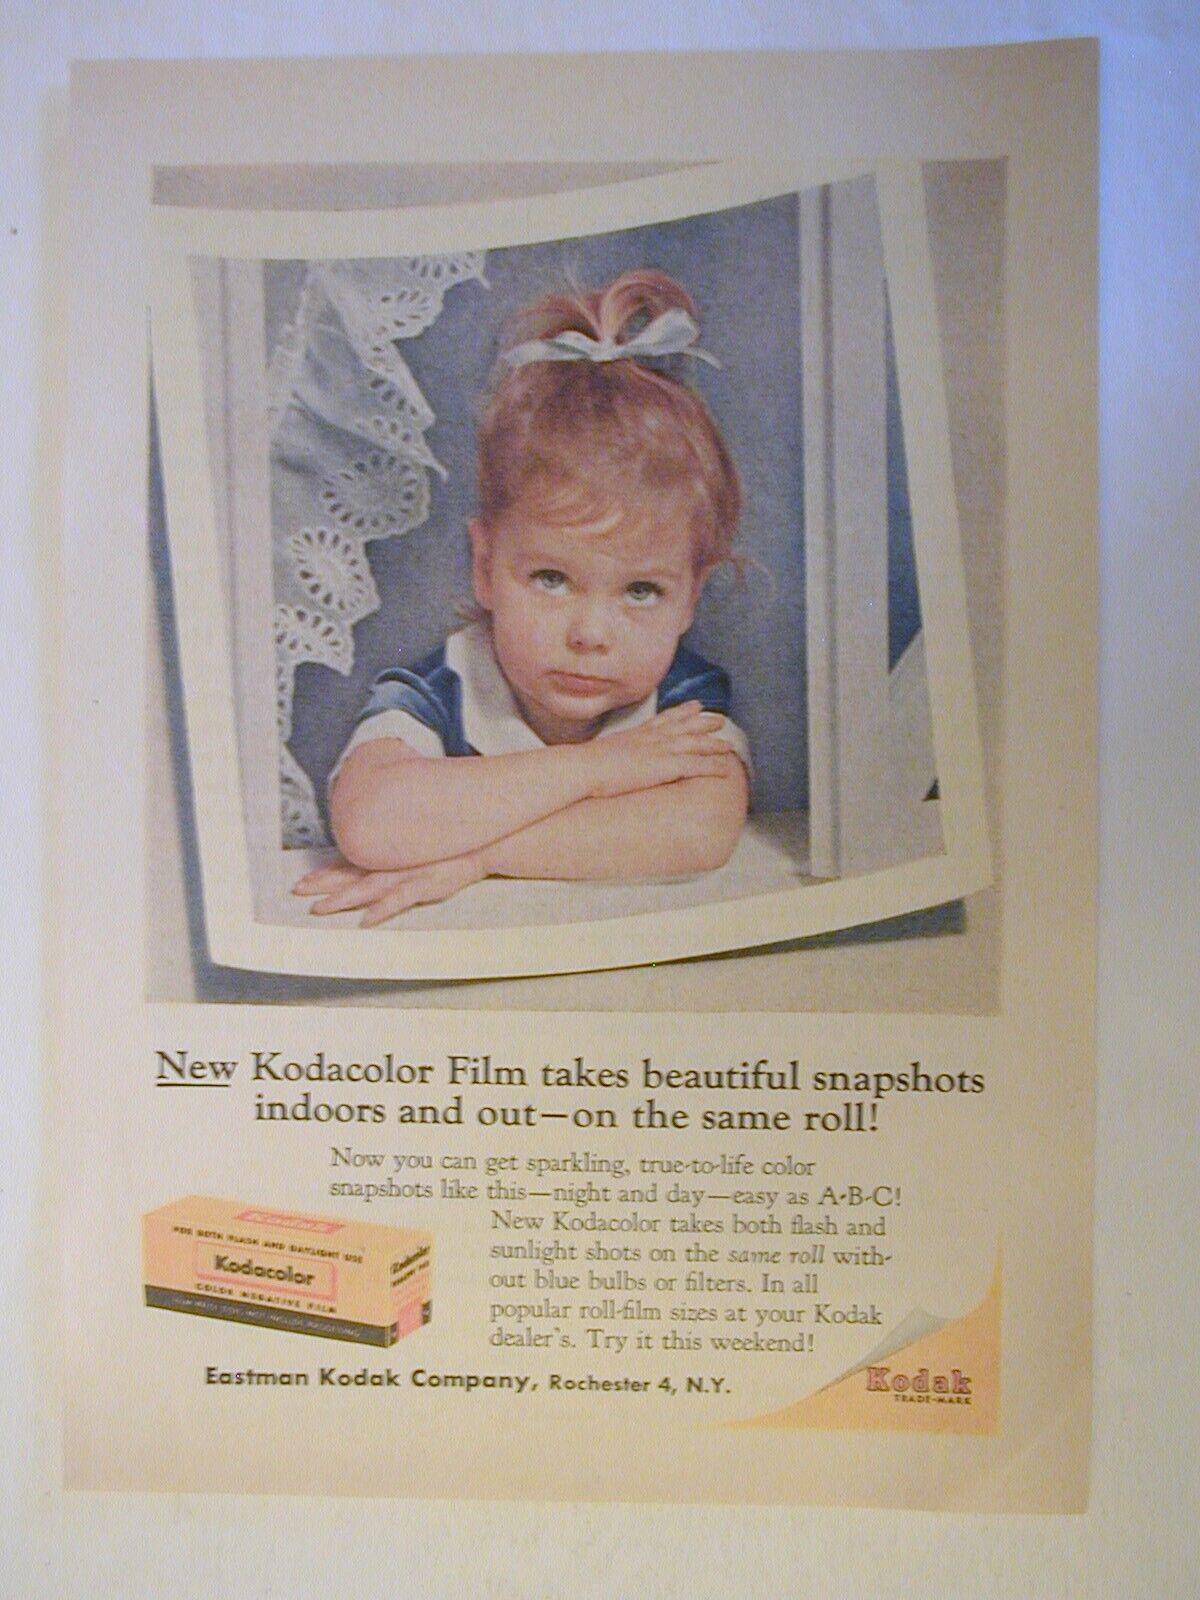 1956 KODAK KODACOLOR FILM TODDLER WITH ARMS CROSSED 5.25X7.5 PRINT AD 51